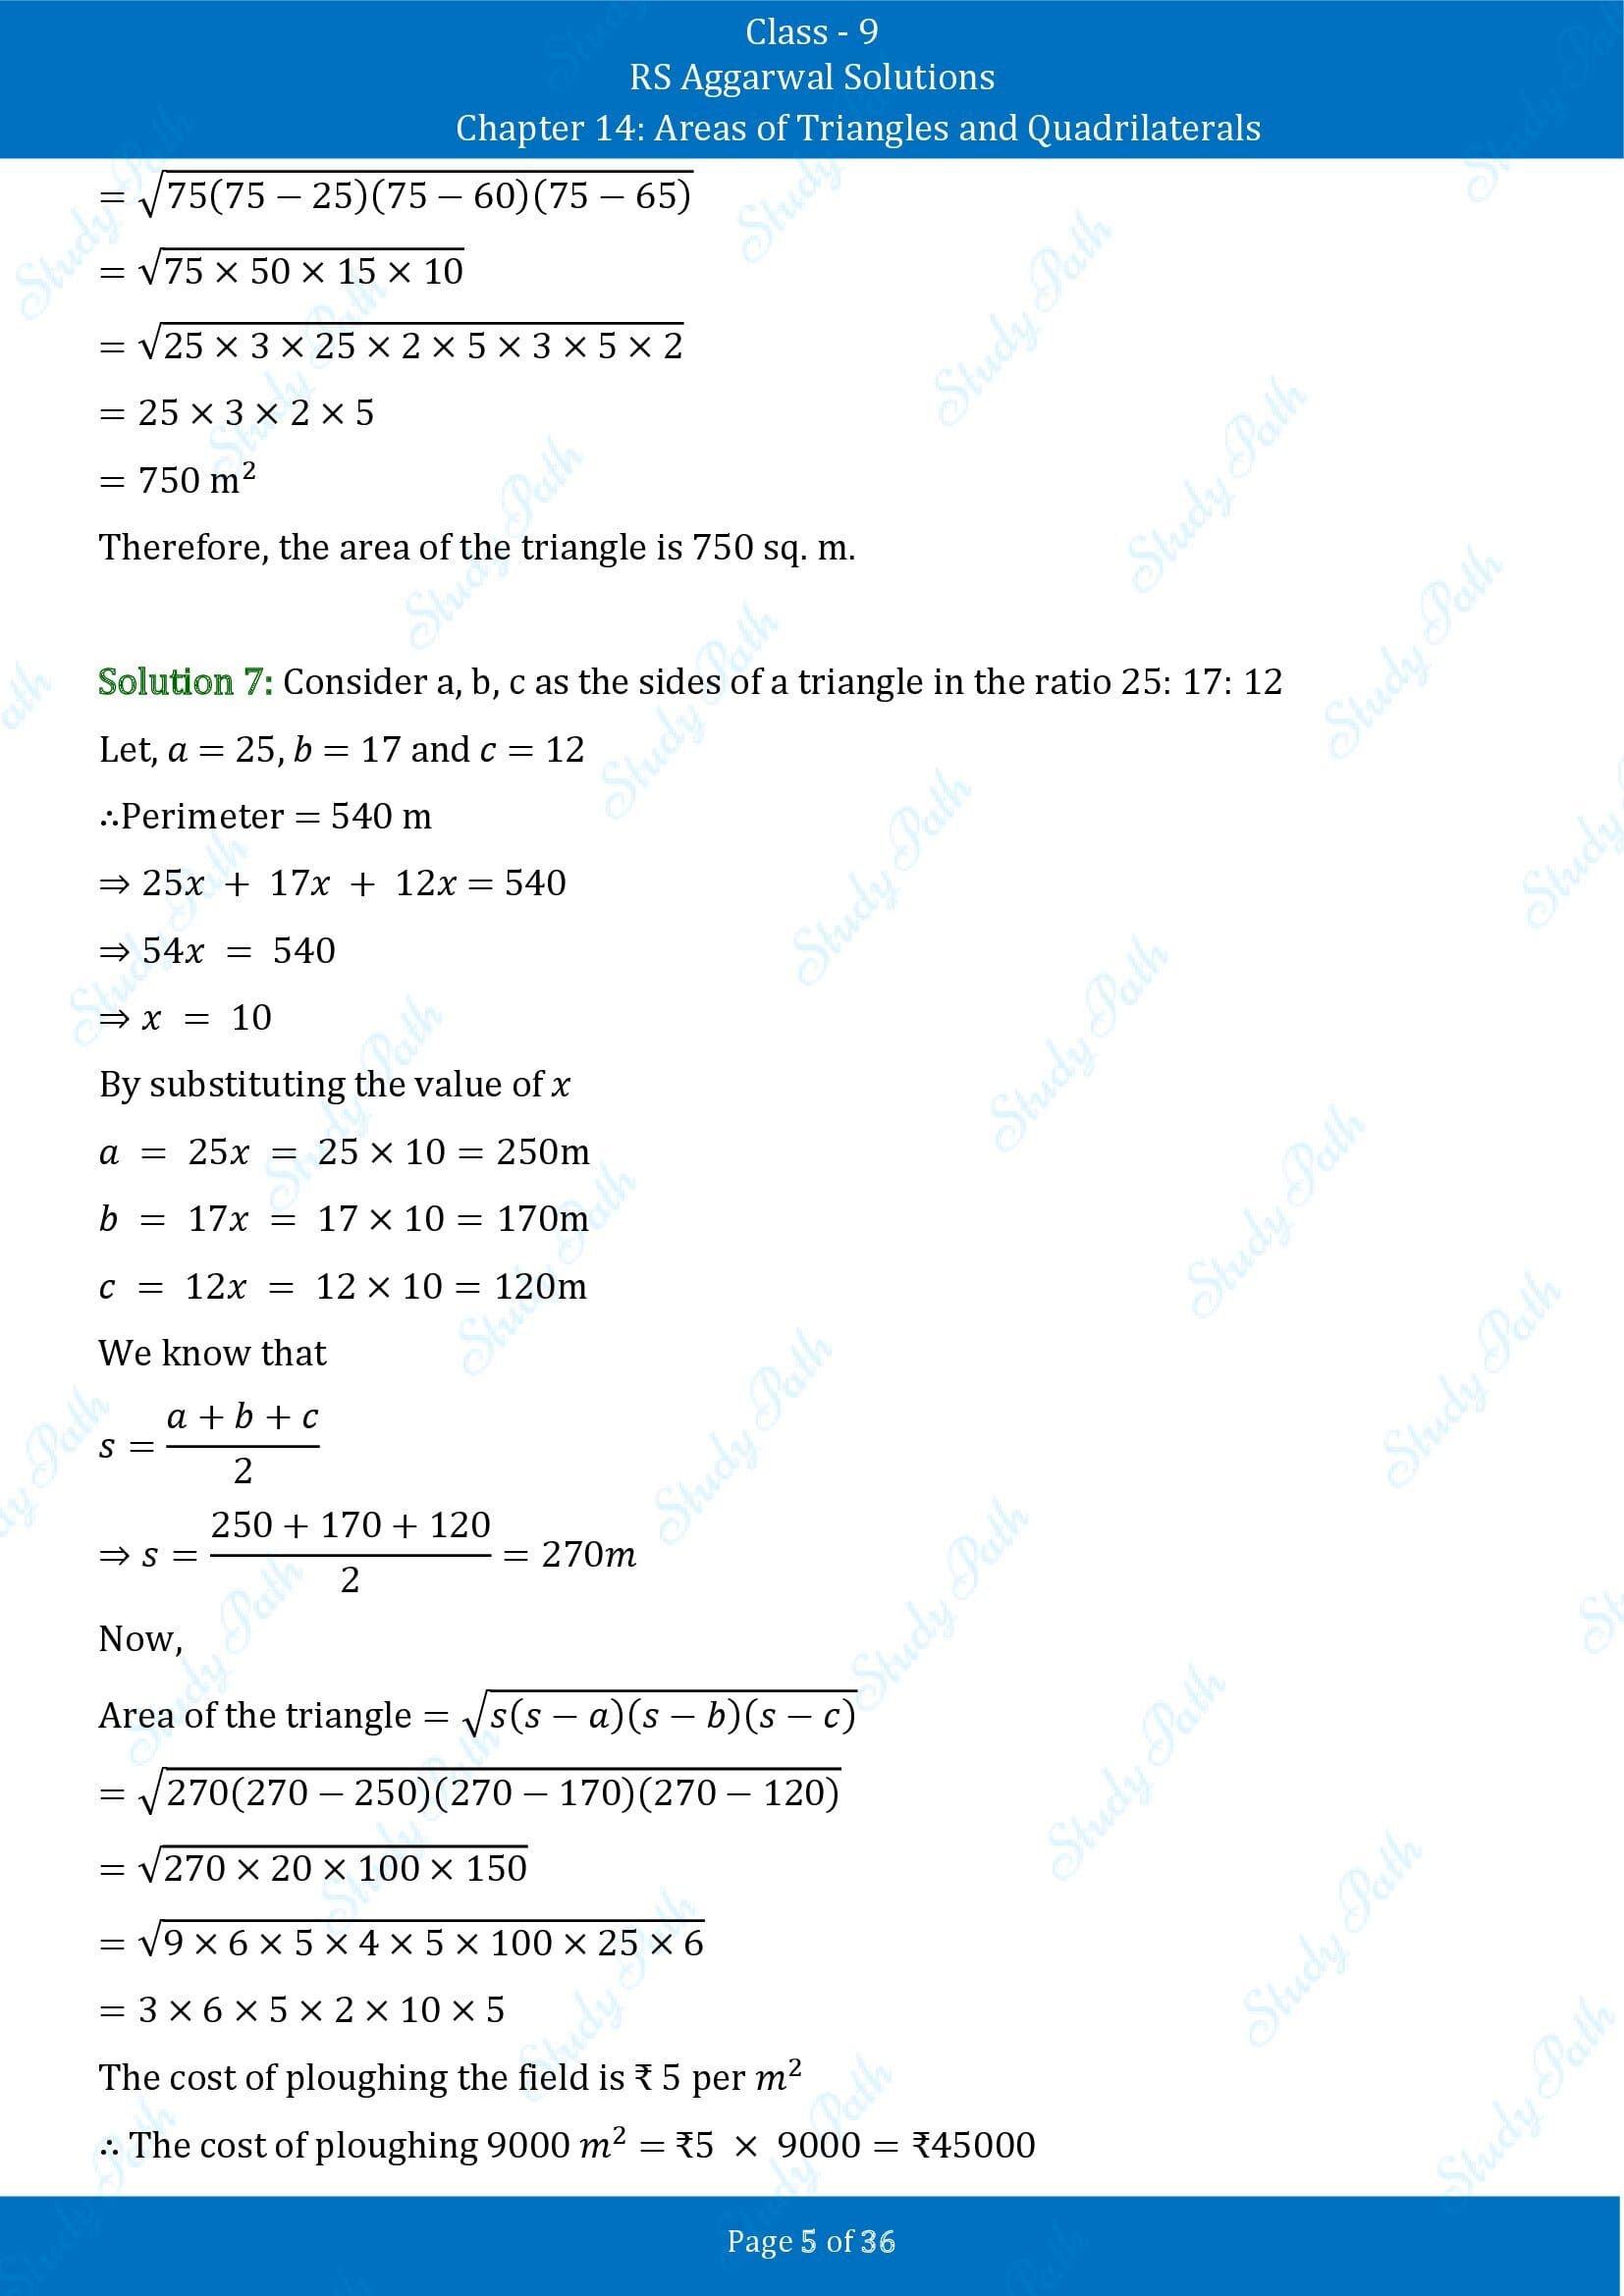 RS Aggarwal Solutions Class 9 Chapter 14 Areas of Triangles and Quadrilaterals Exercise 14 00005